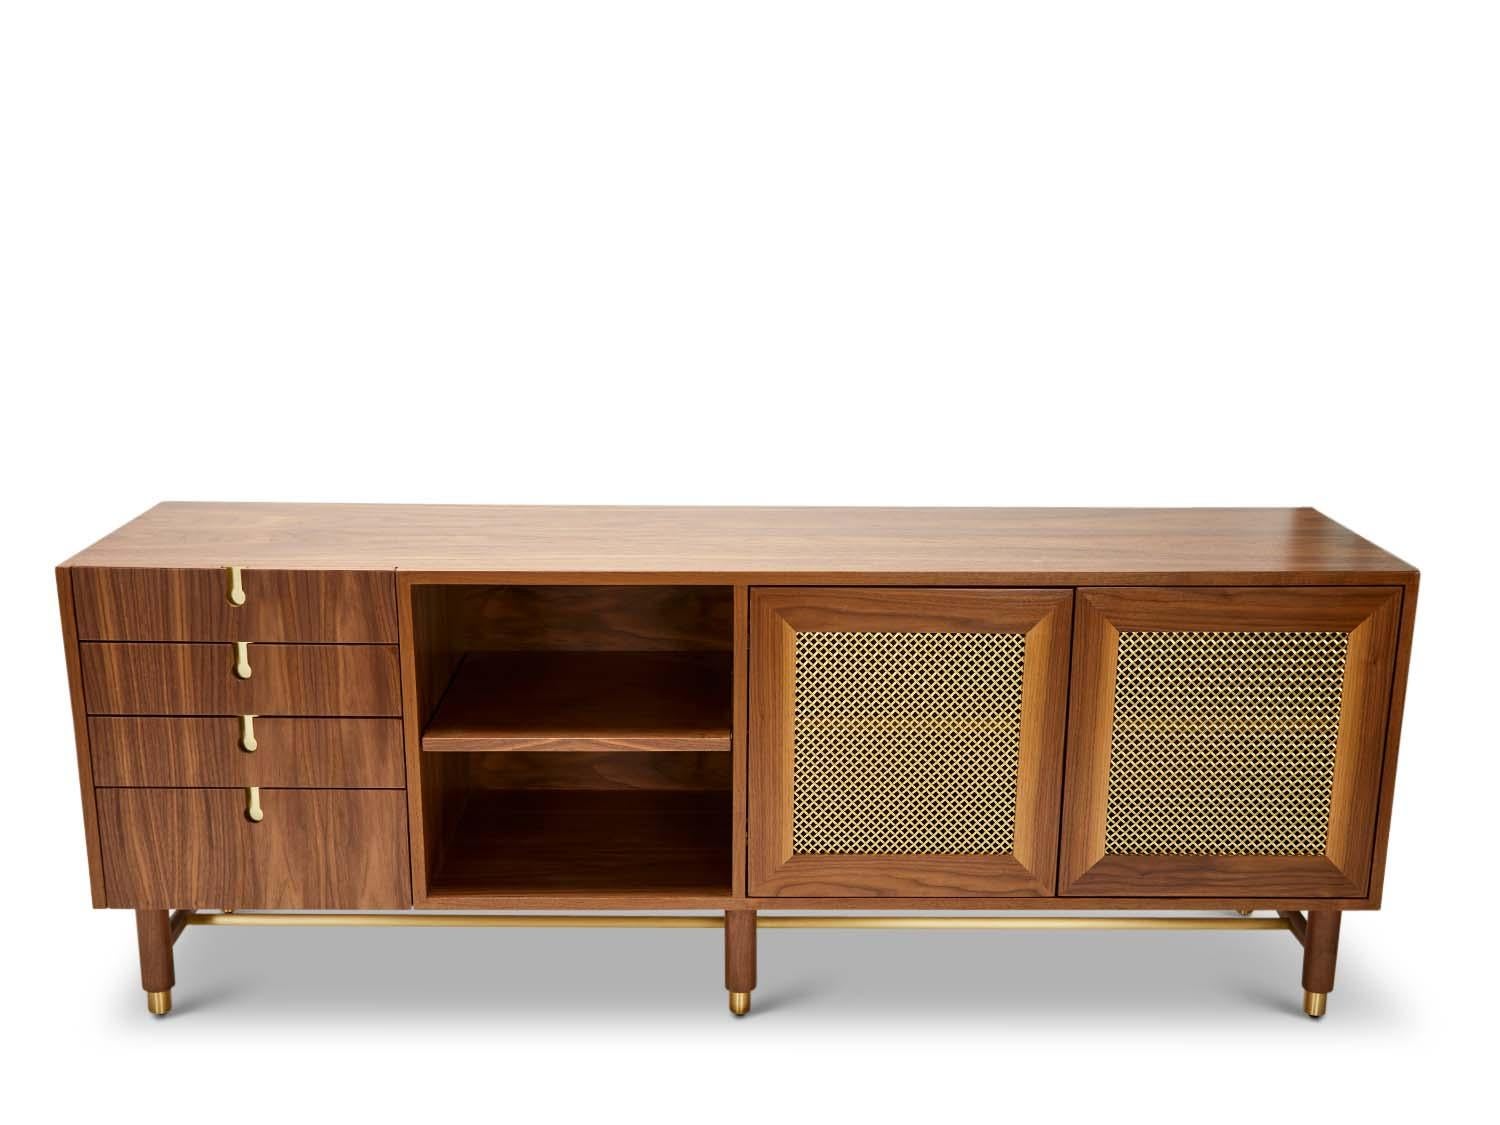 The Niguel Credenza features brass cap feet, a brass cross-stretcher bar and brass inlaid details with brass mesh sliding bypass doors. 

The Lawson-Fenning Collection is designed and handmade in Los Angeles, California. Reach out to discover what